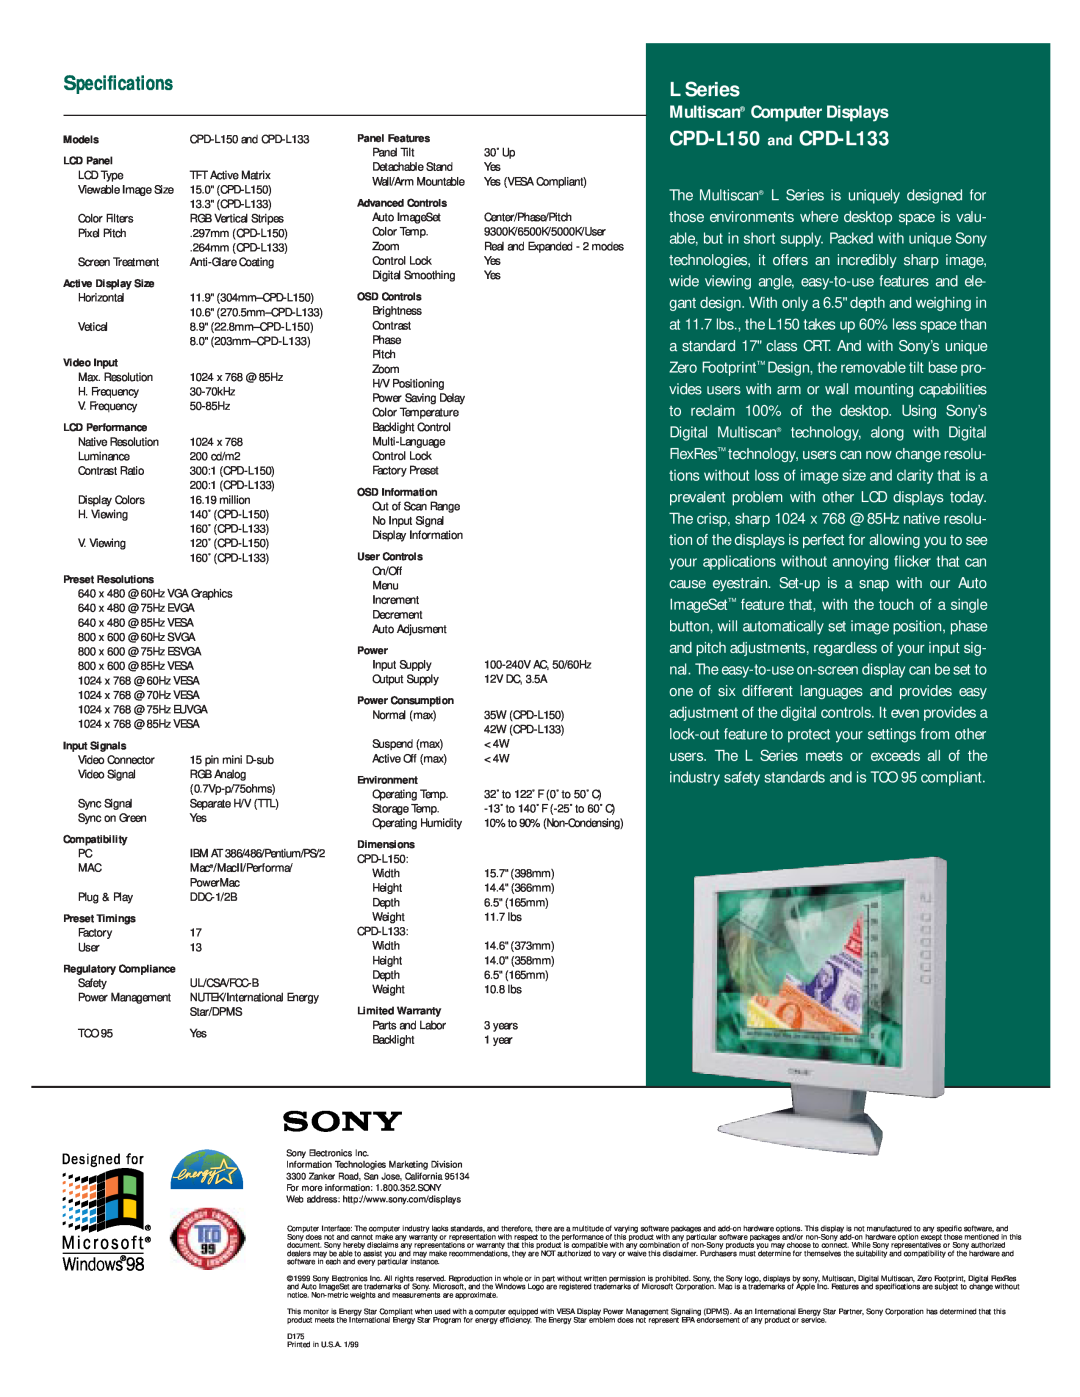 Sony manual CPD-L150 and CPD-L133, Specifications, L Series, Multiscan Computer Displays 